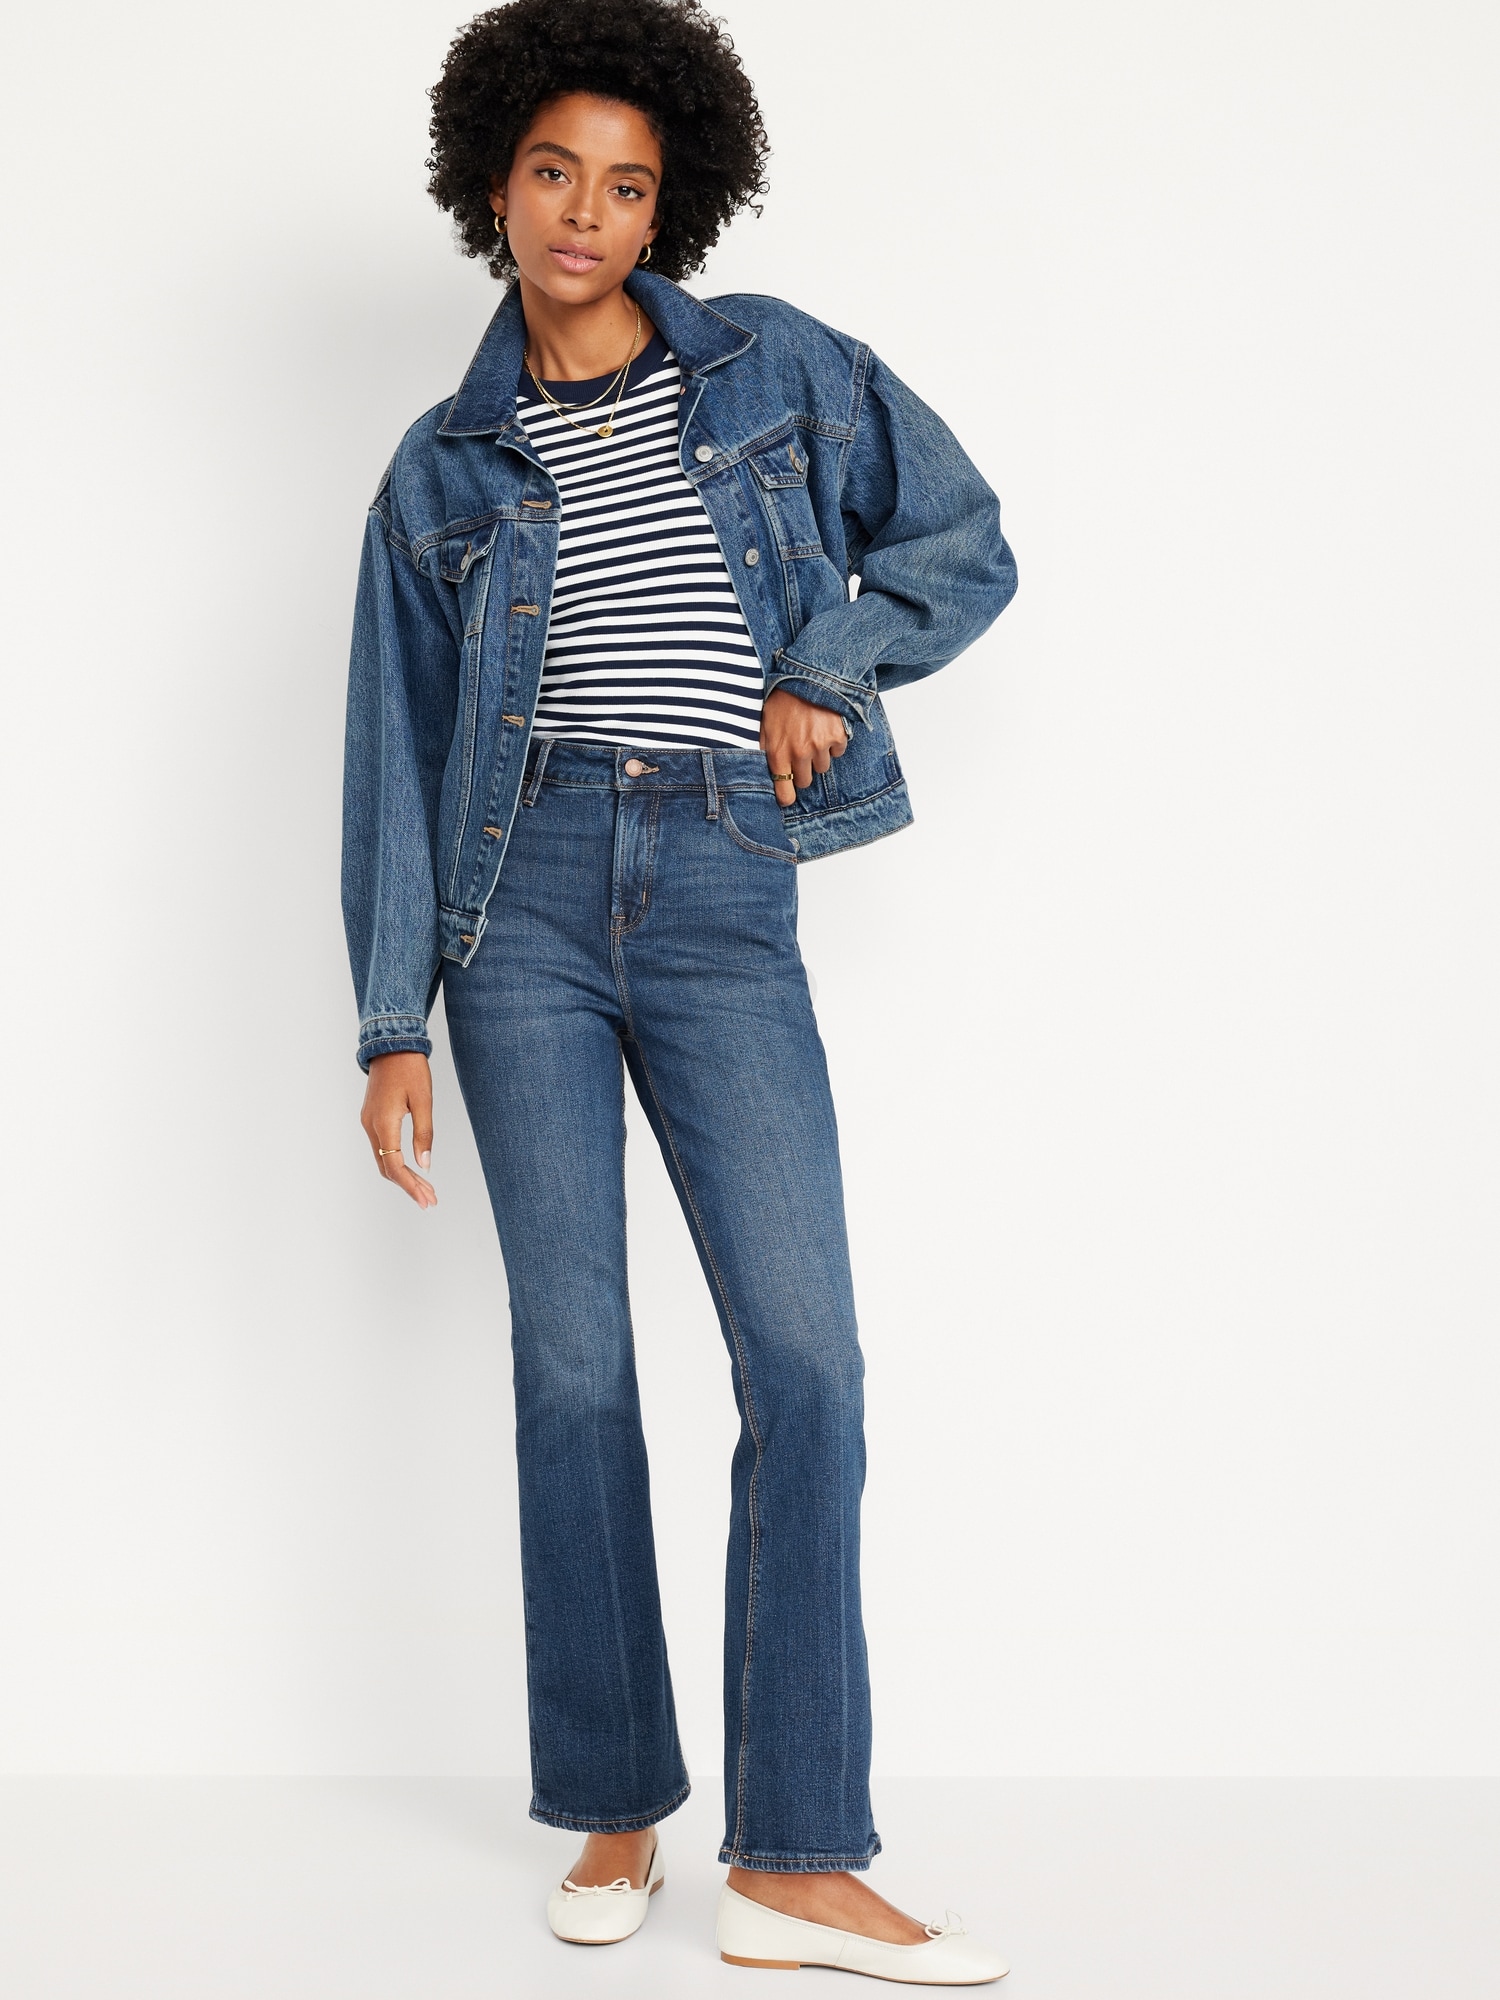 Extra High-Waisted Flare Jeans Hot Deal